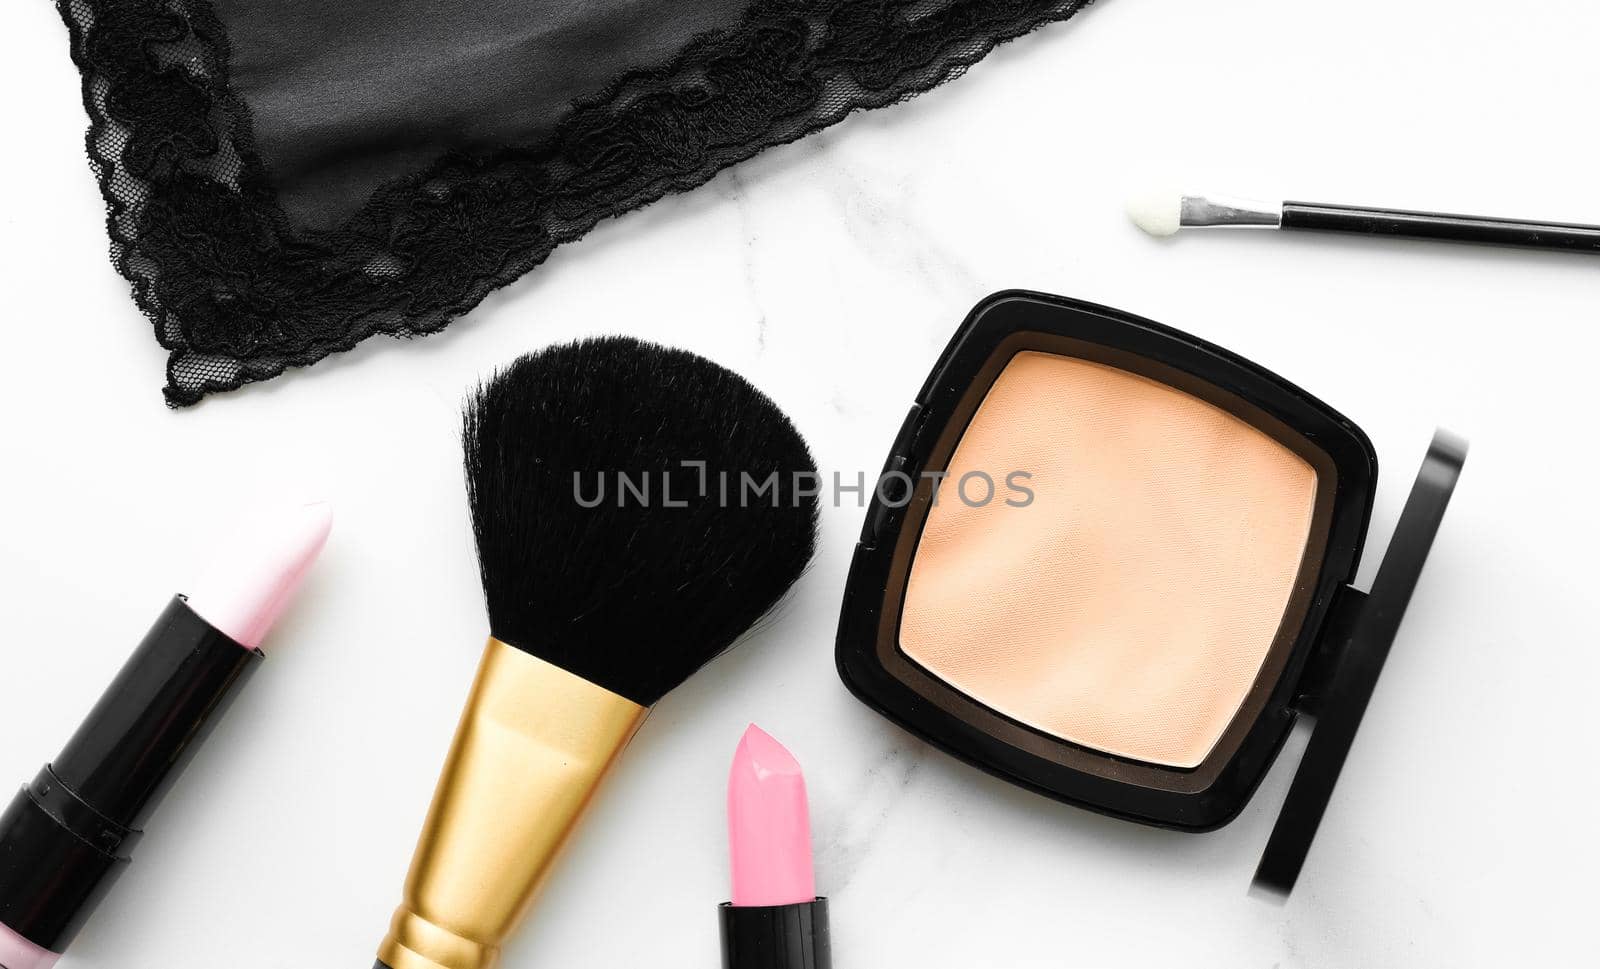 Make-up and cosmetics products on marble, flatlay background - modern feminine lifestyle, beauty blog and fashion inspiration concept